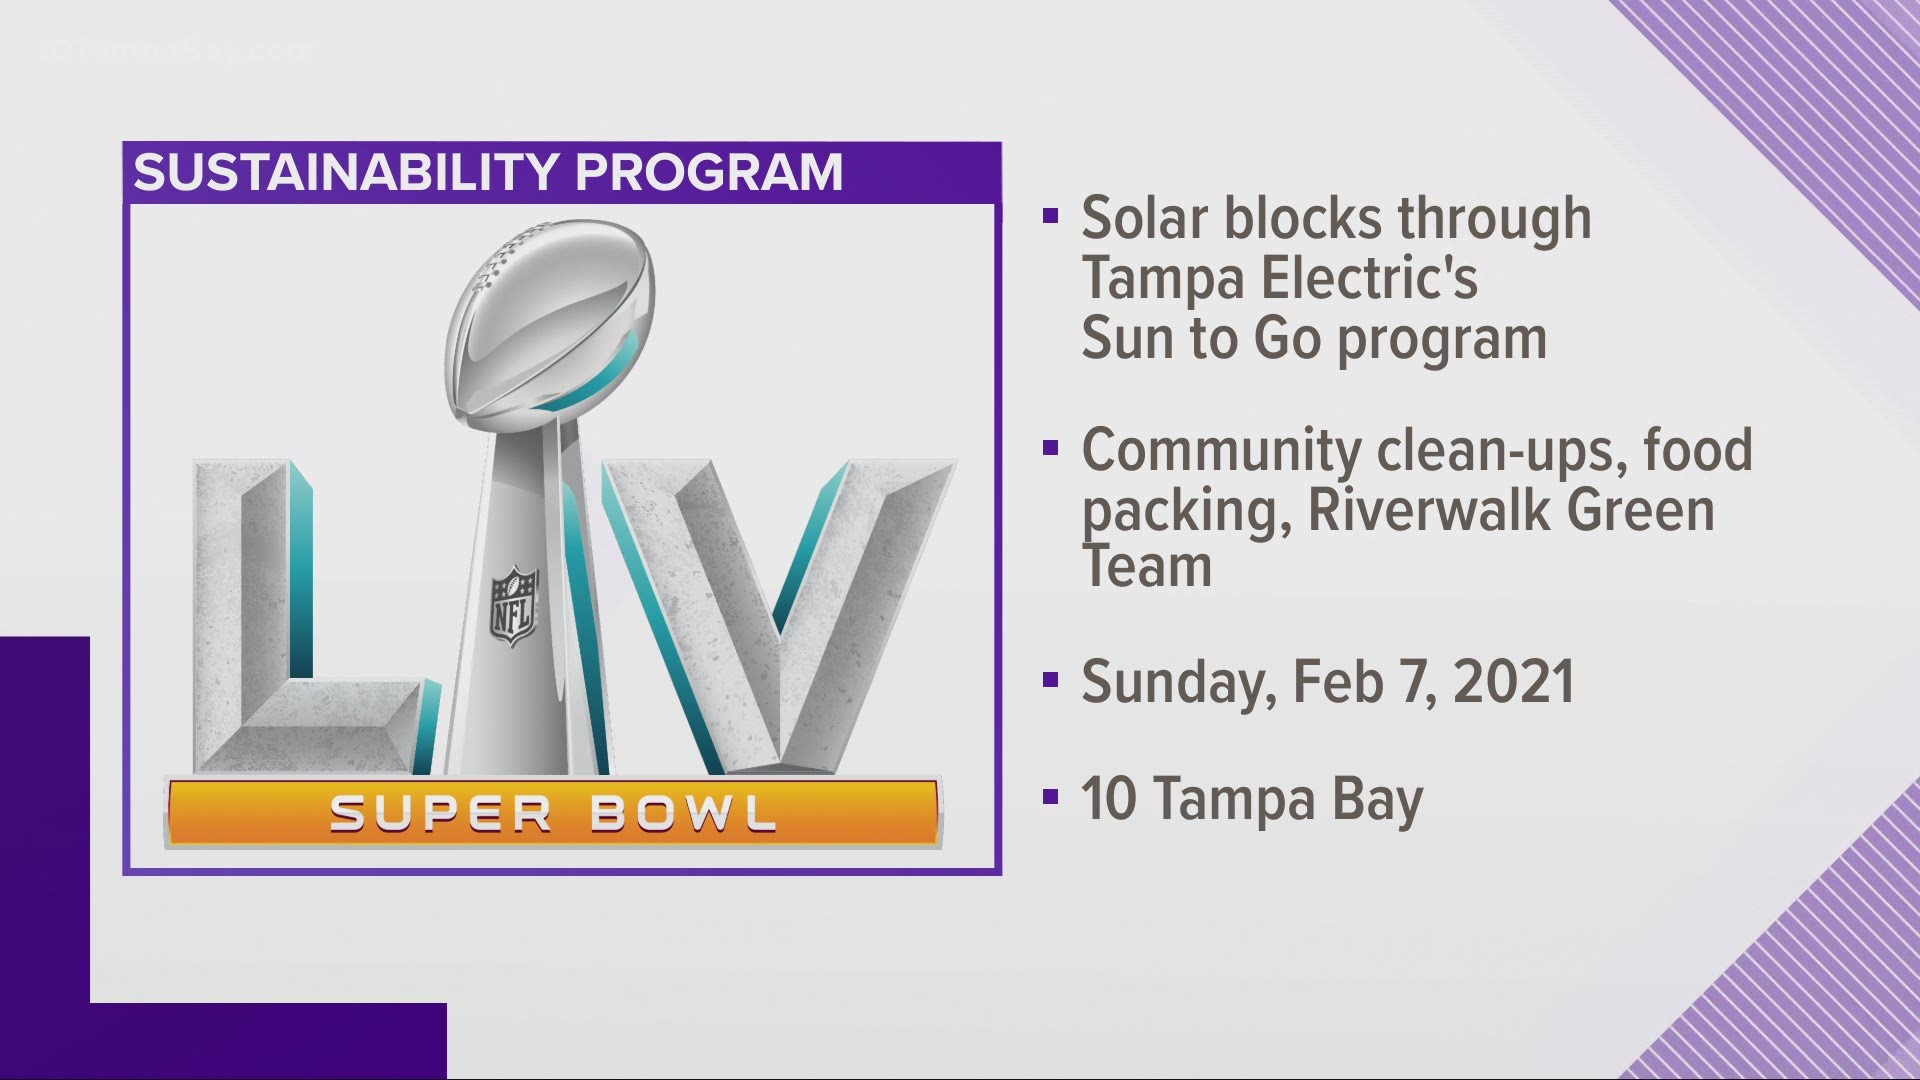 The program is in partnership with Tampa Electric and includes setting up solar blocks at Super Bowl events through TECO's Sun to Go program.